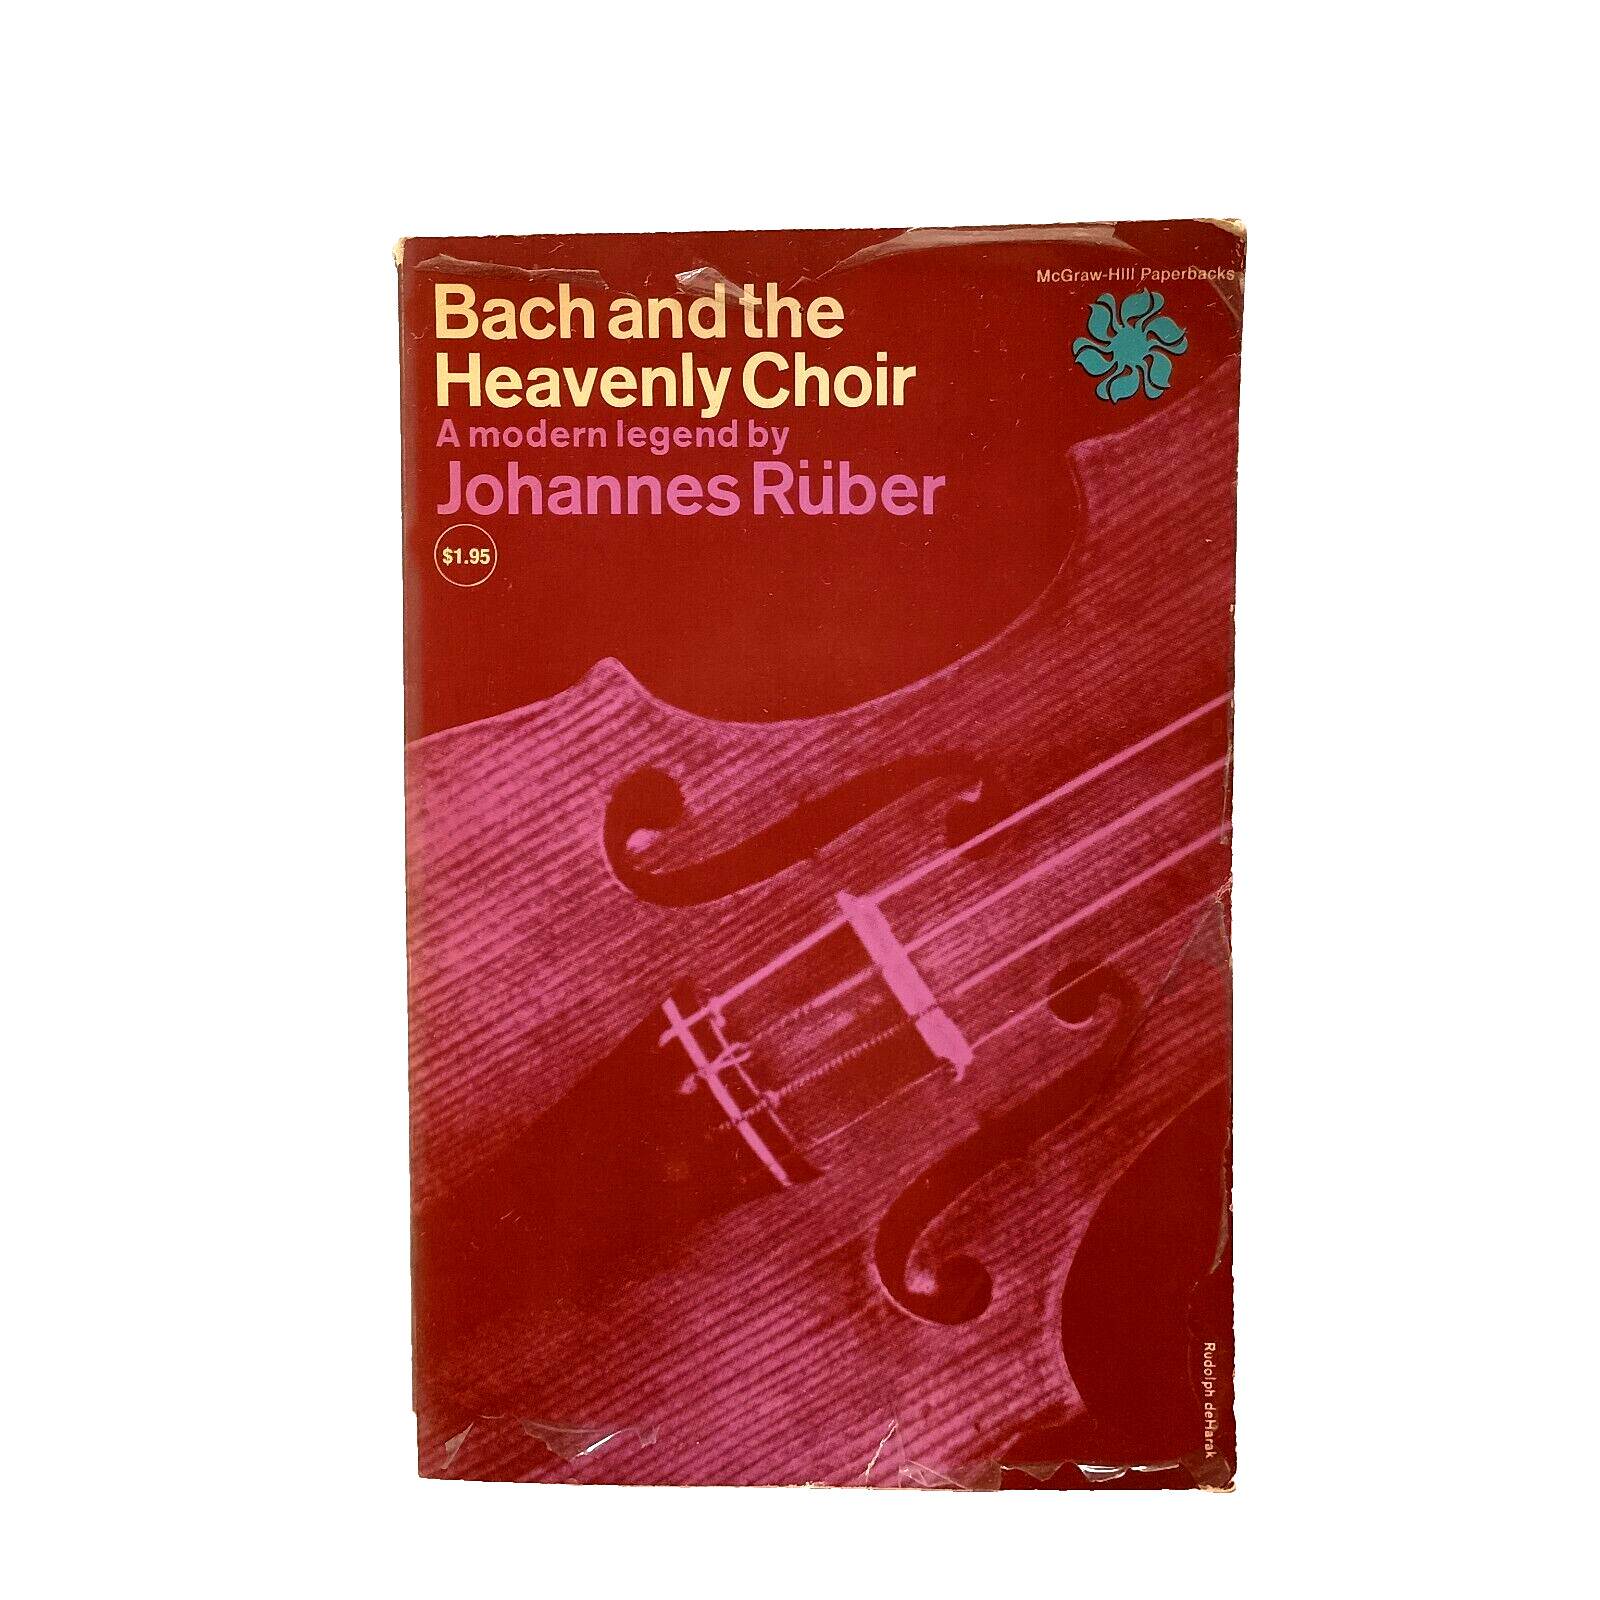 Vintage 1964 First Edition BACH AND THE HEAVENLY CHOIR Book by Johannes Ruber